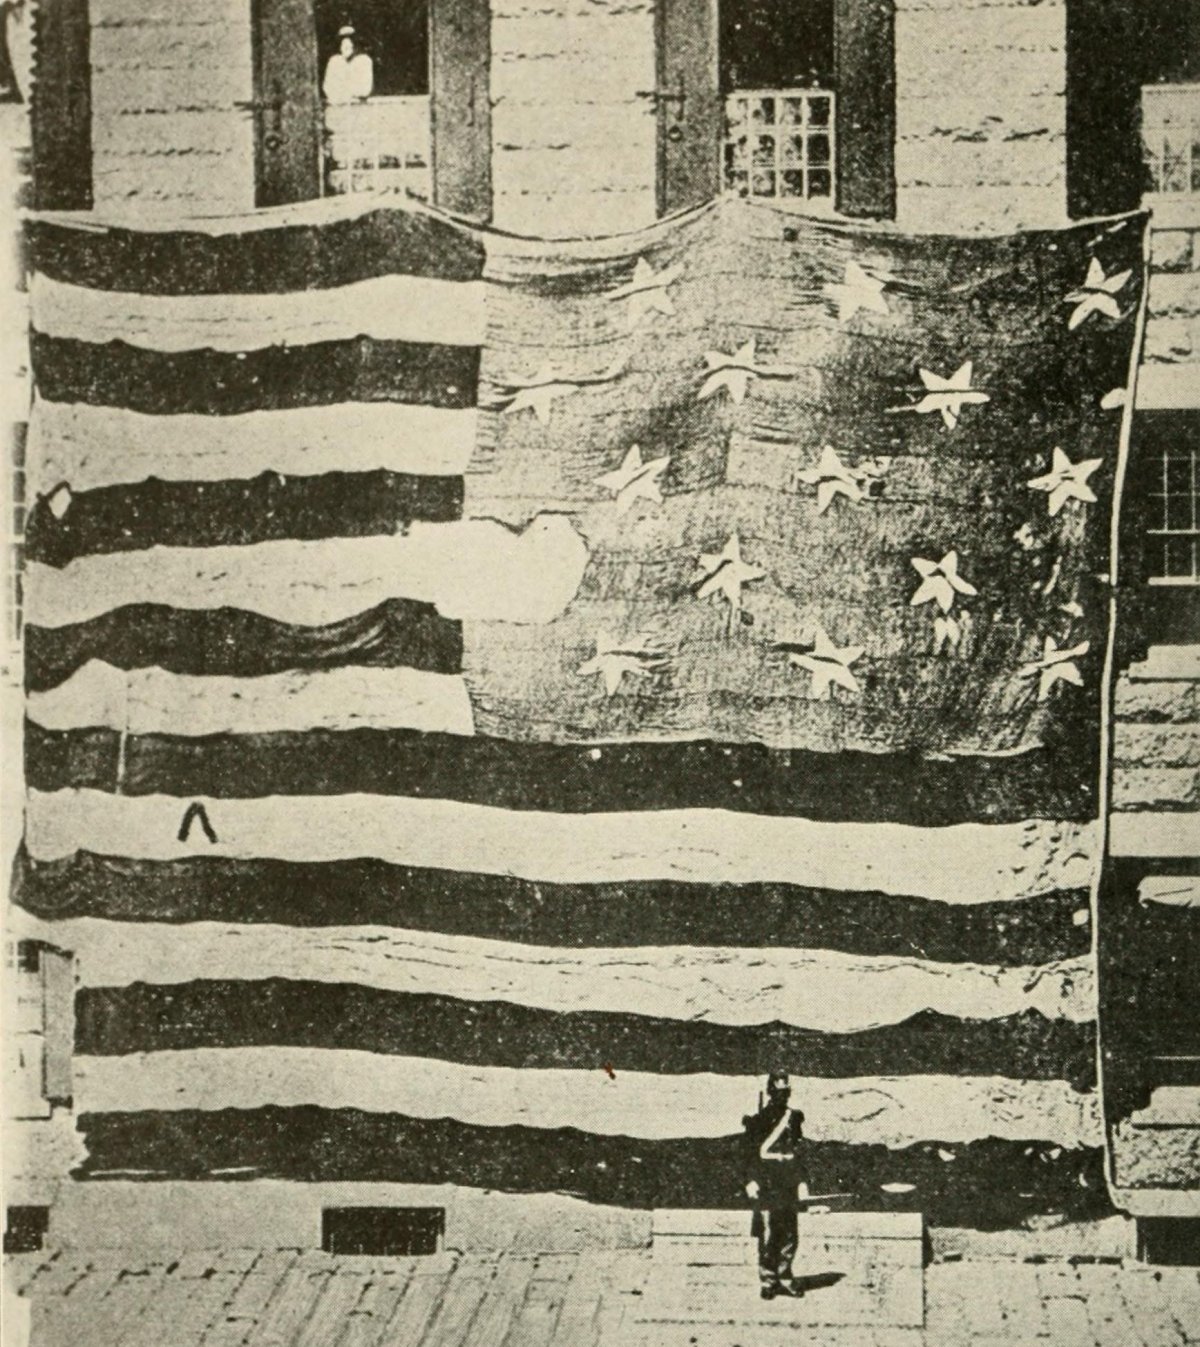 Flag that flew over Fort McHenry inspiring the Star-Spangled Banner